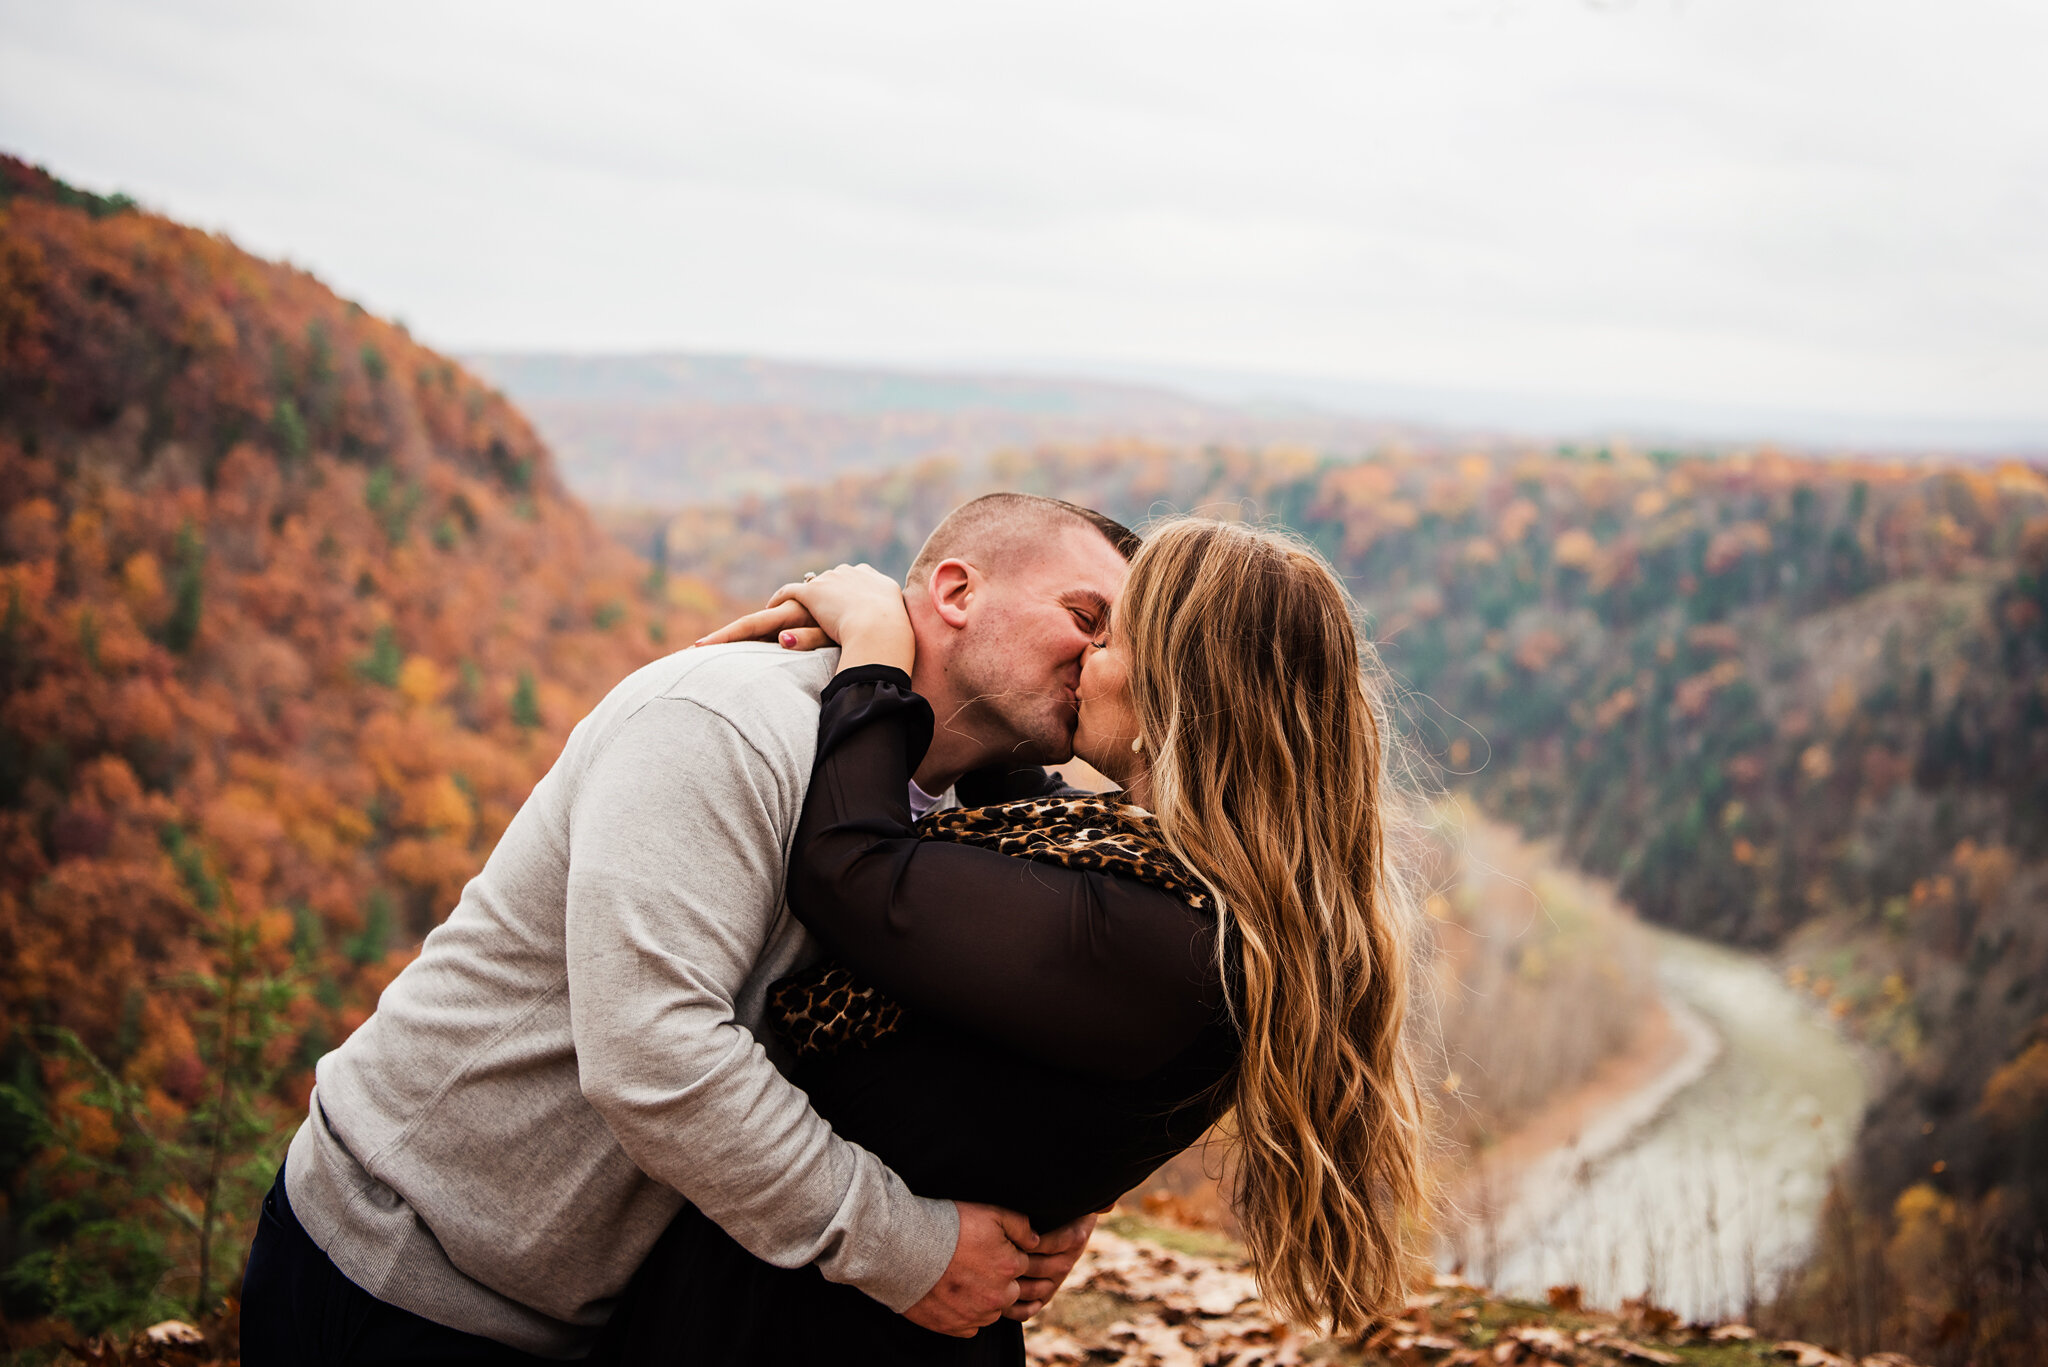 Letchworth_State_Park_Rochester_Engagement_Session_JILL_STUDIO_Rochester_NY_Photographer_0810.jpg